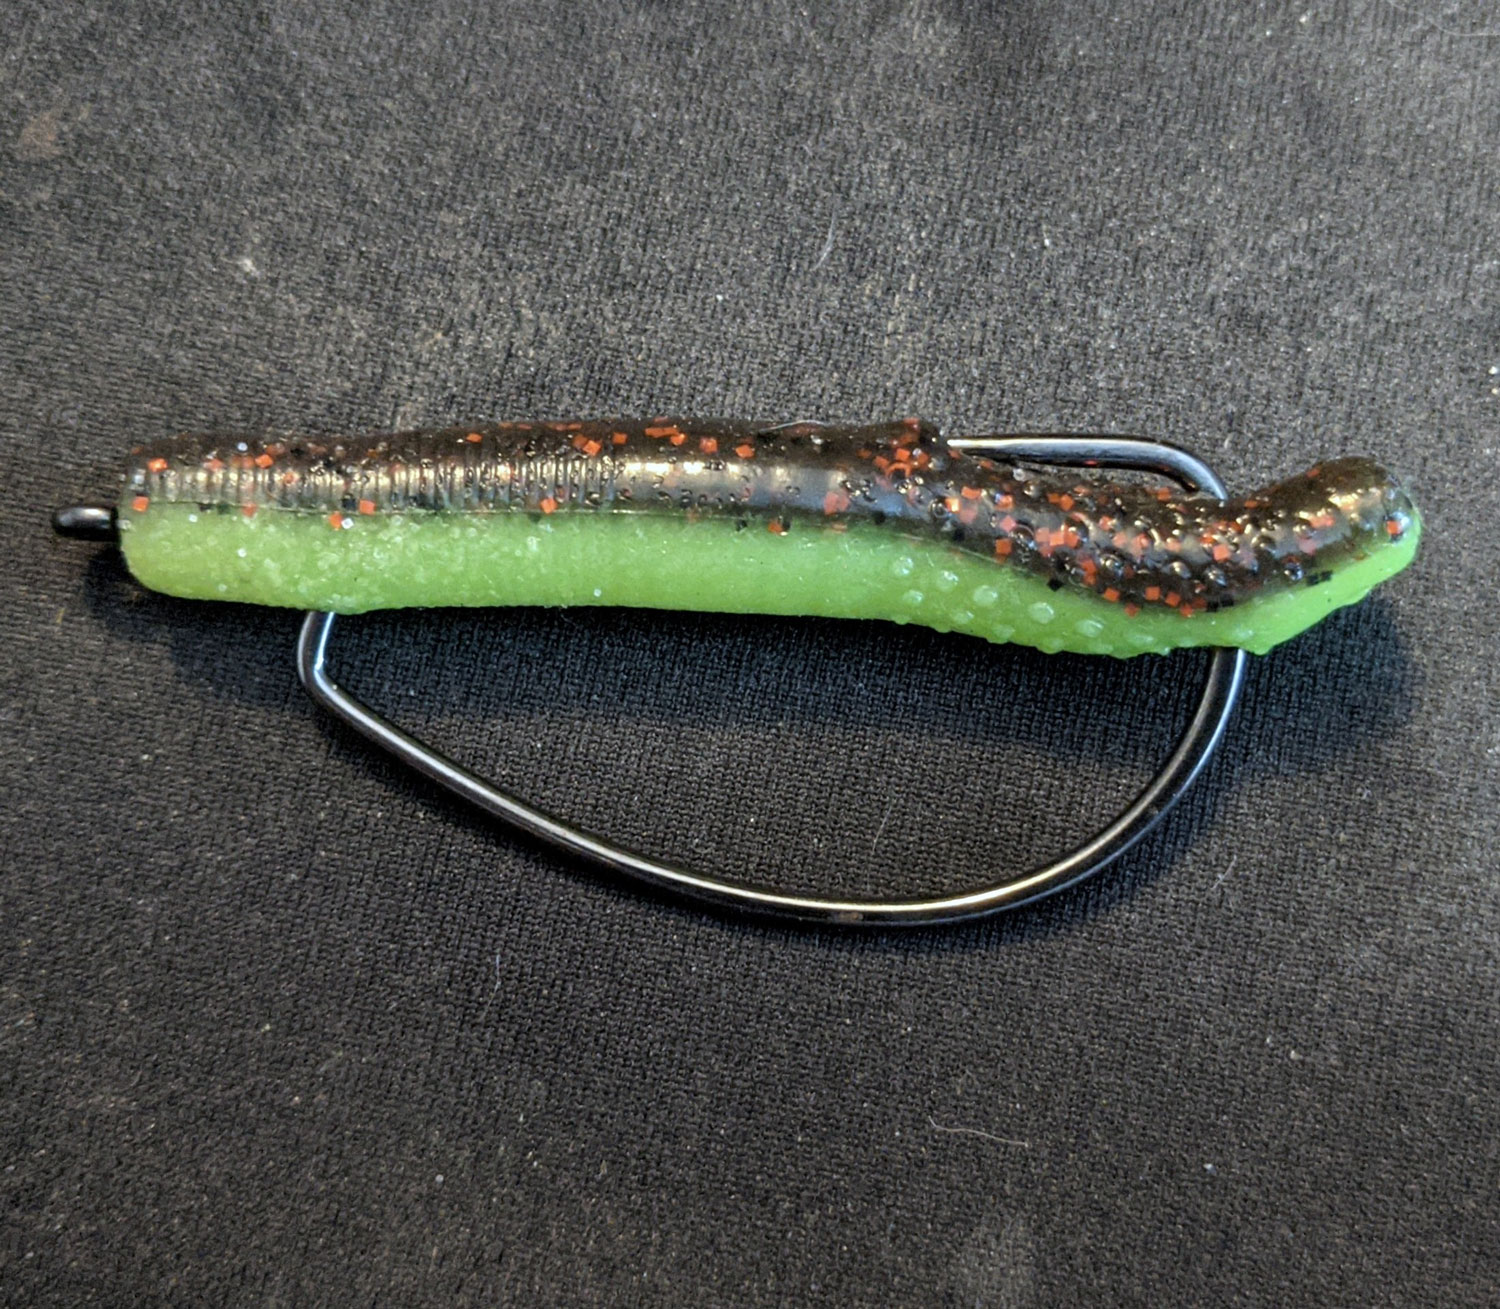 How To Rig a Texas Rig Worm - Best Way 